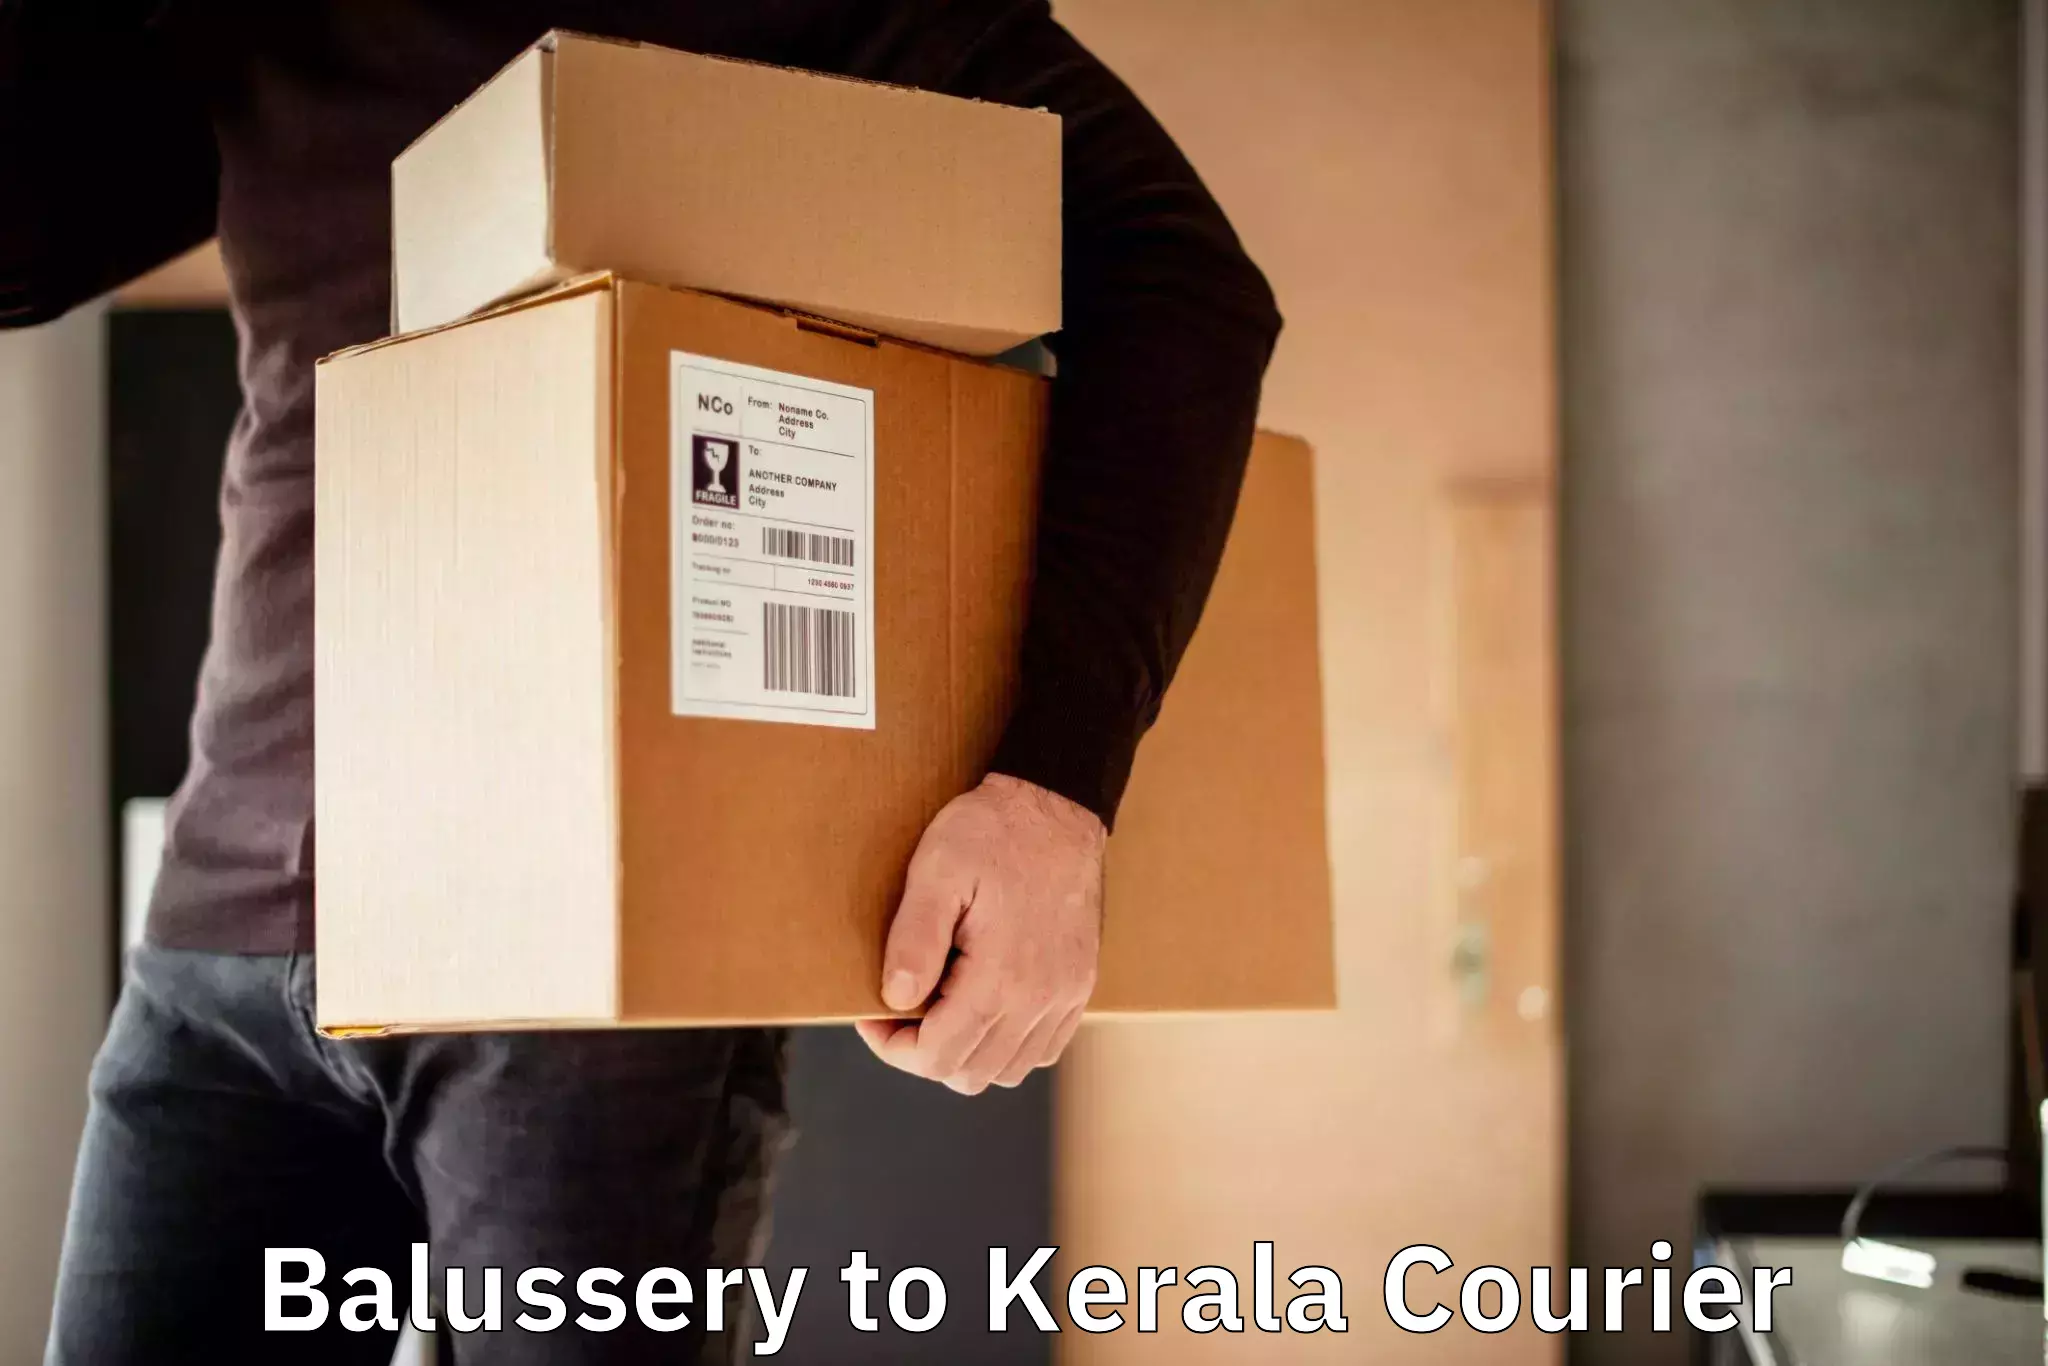 Courier service comparison Balussery to Valanchery